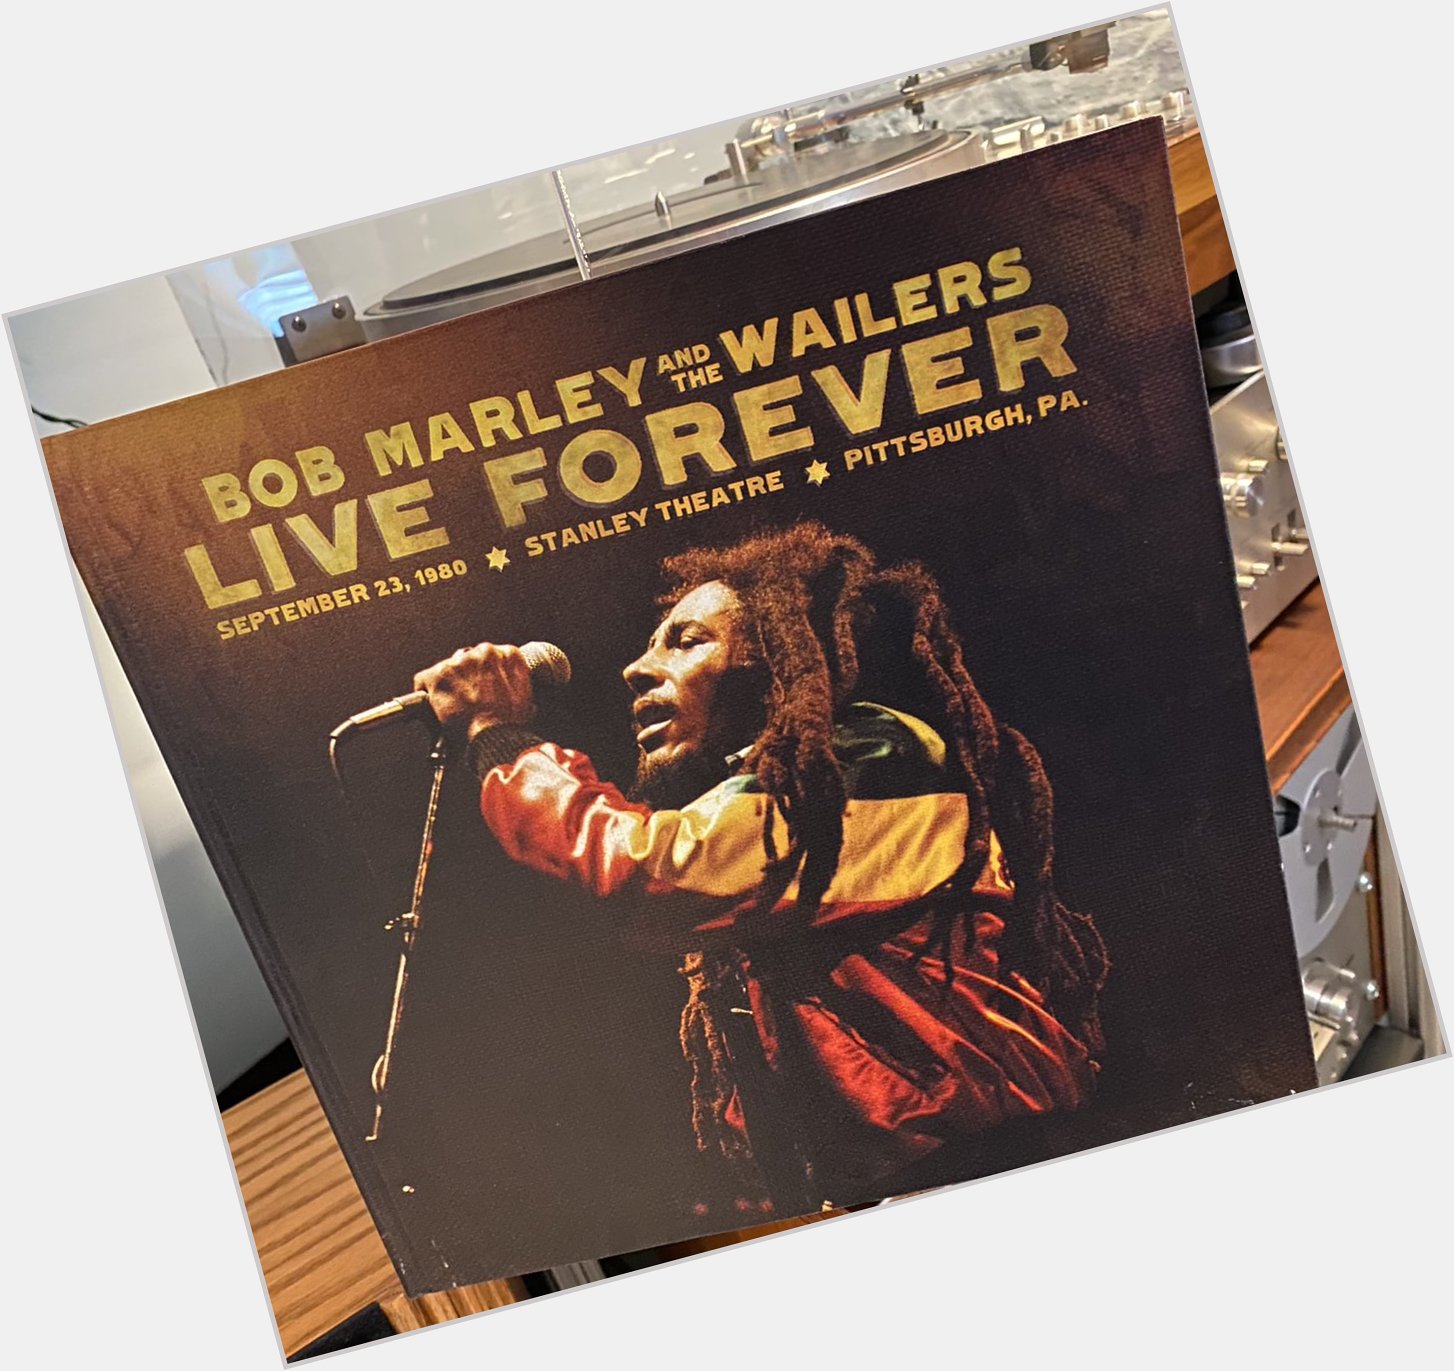 Now spinning at Skylab:

Bob Marley & The Wailers - Live Forever Happy 76th birthday !!! 